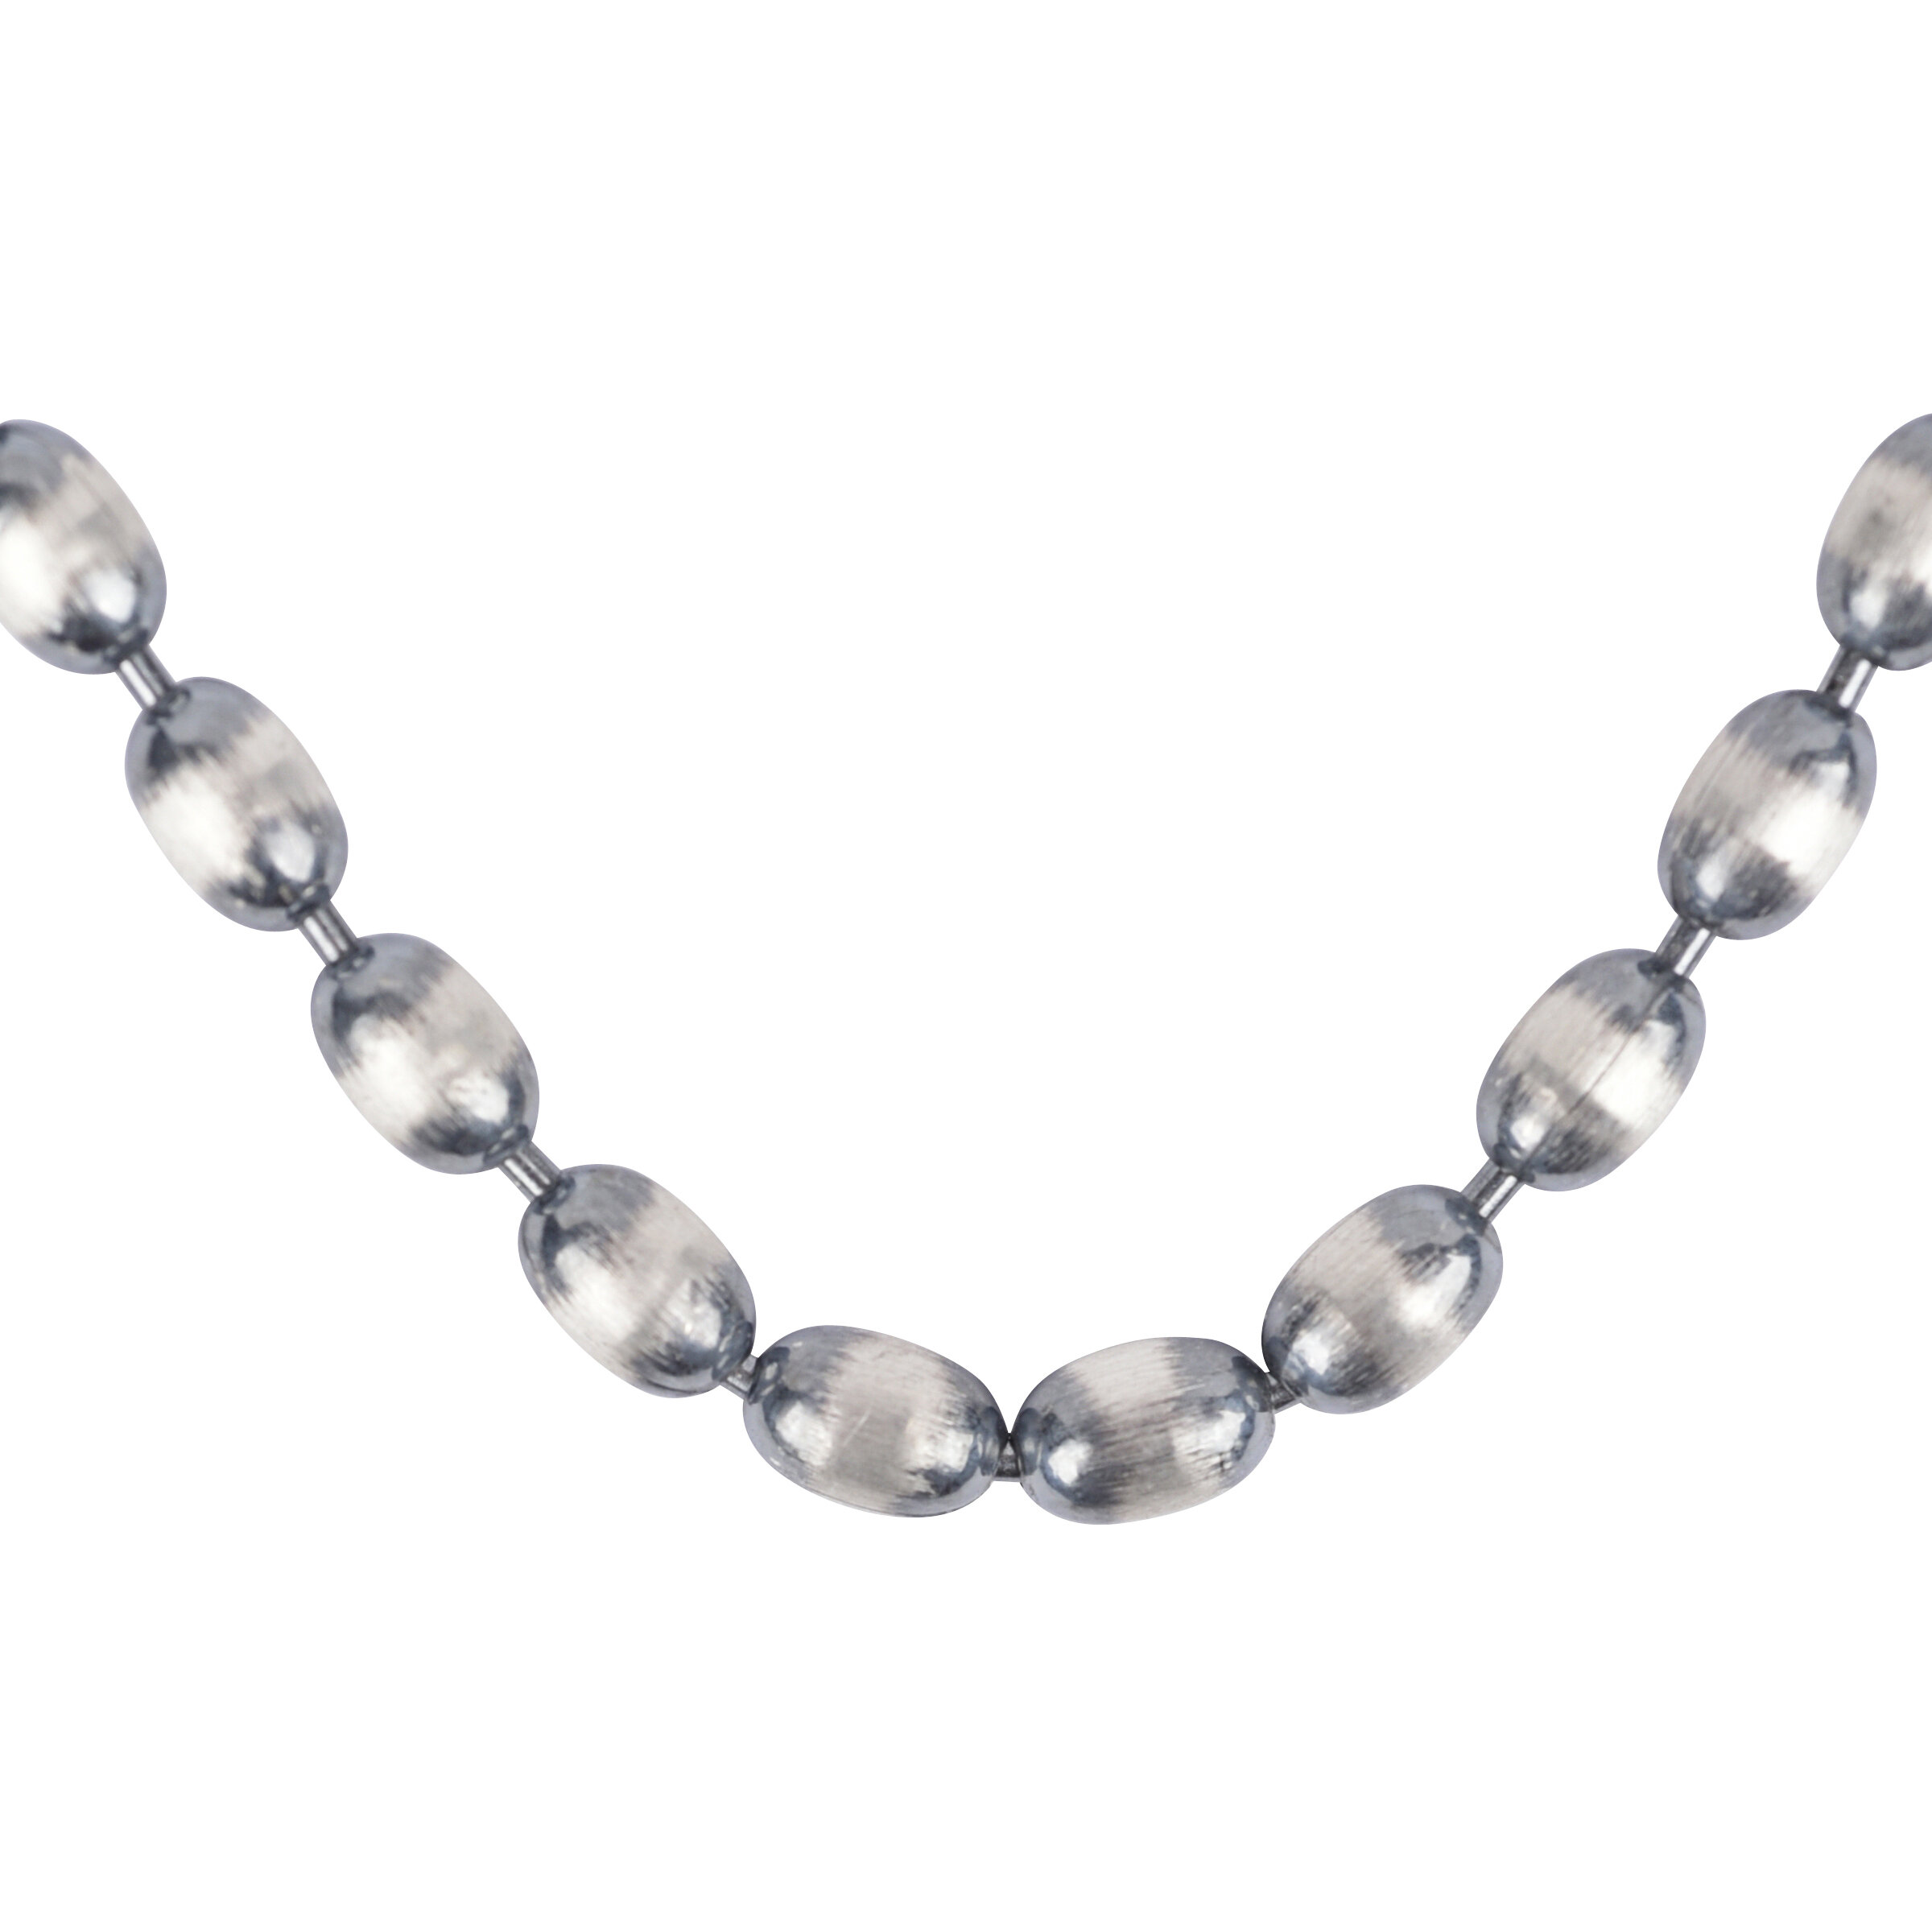 White/silver bead necklace